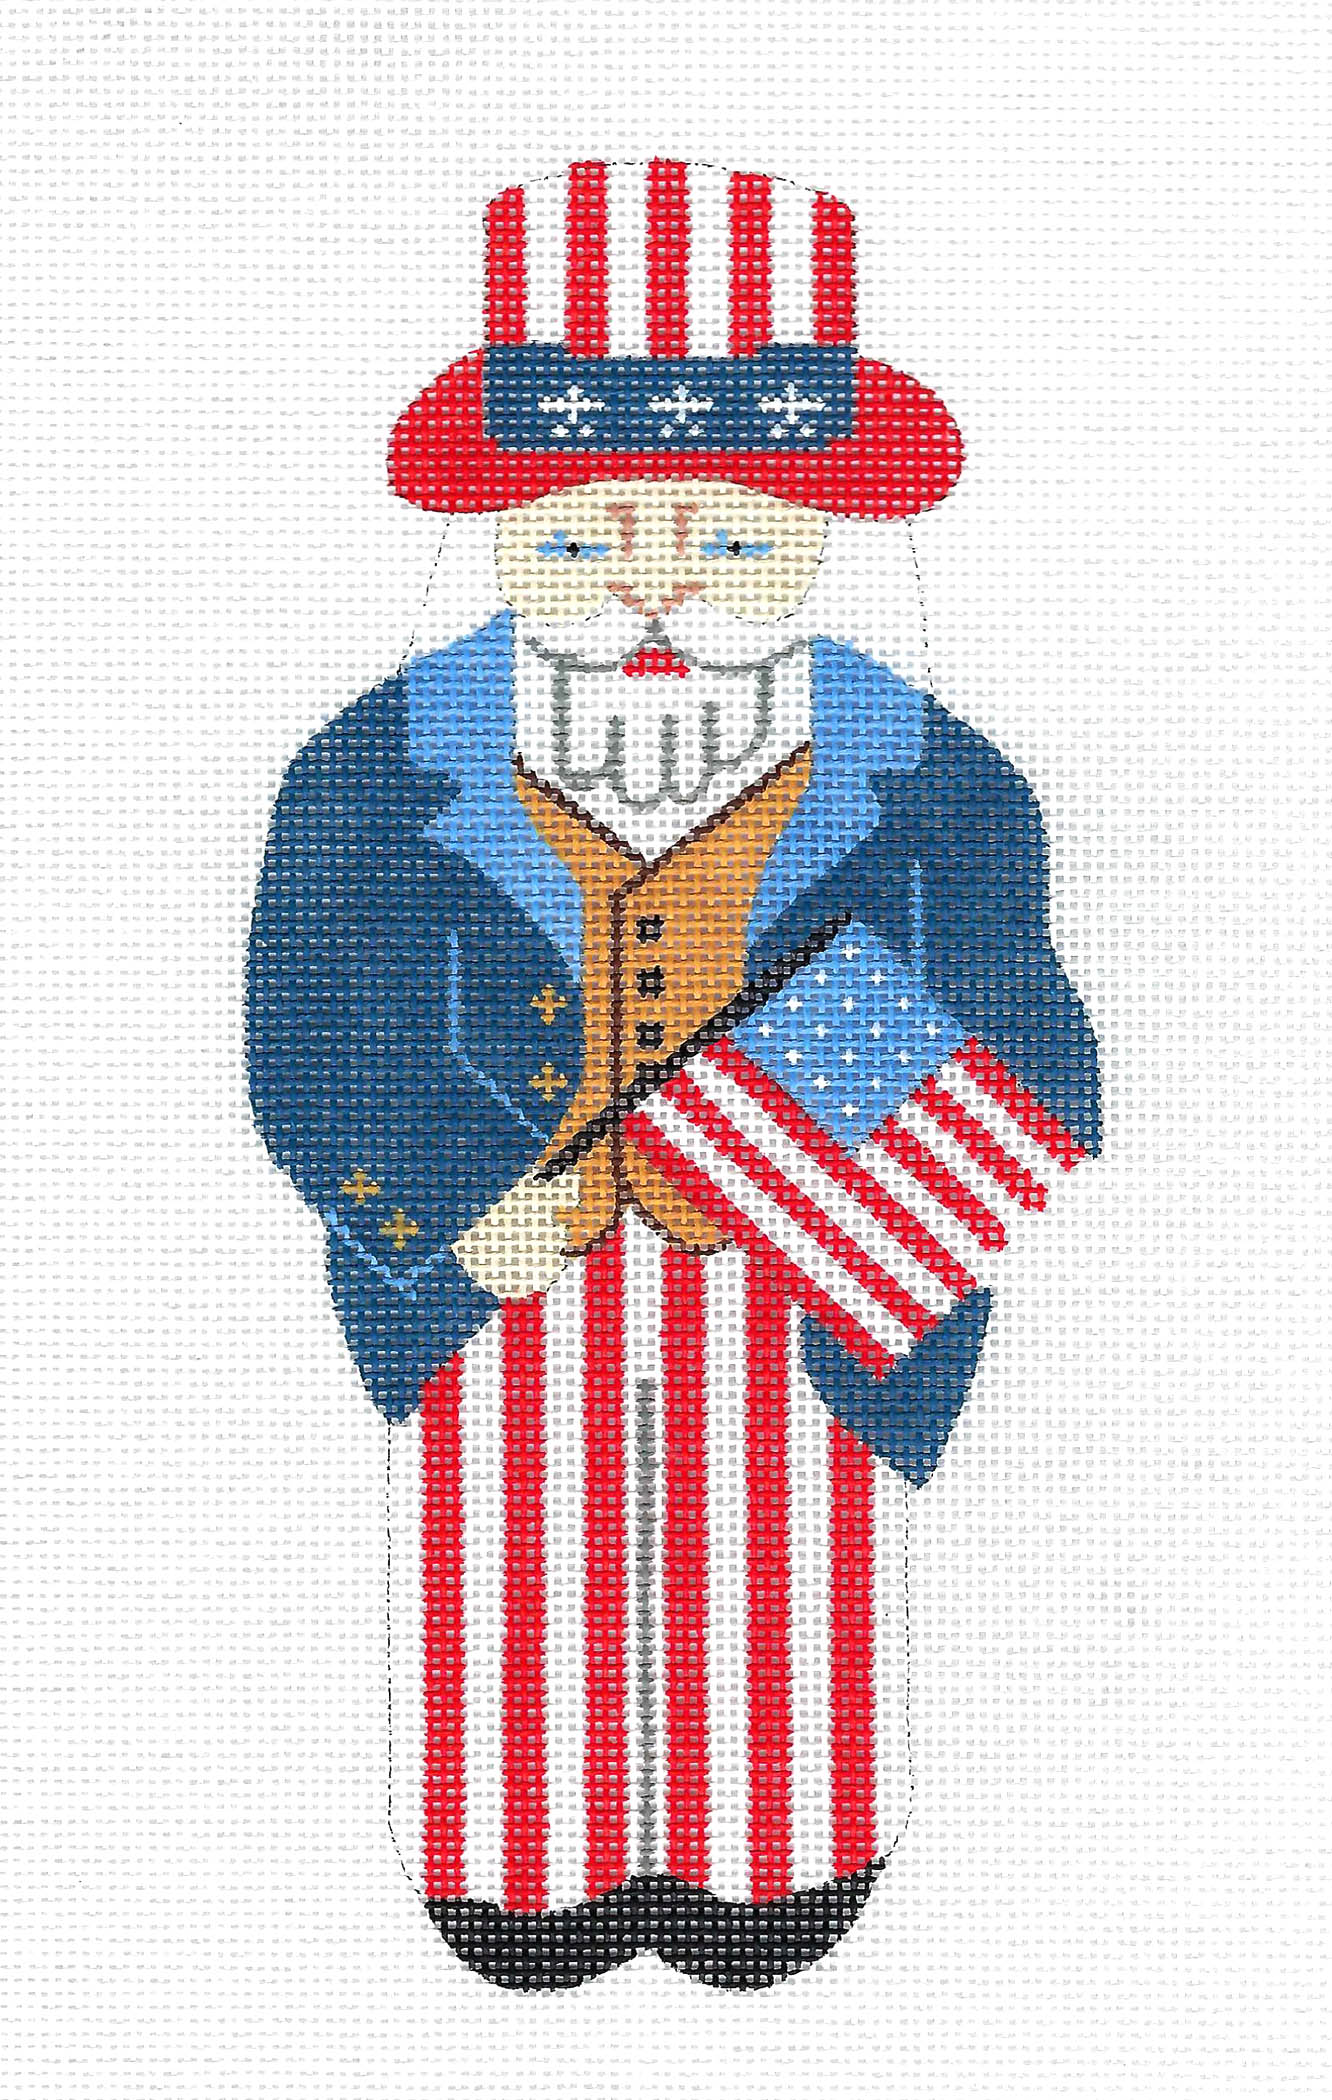 Patriotic ~ UNCLE SAM Patriotic Ornament handpainted Needlepoint Canvas by Silver Needle